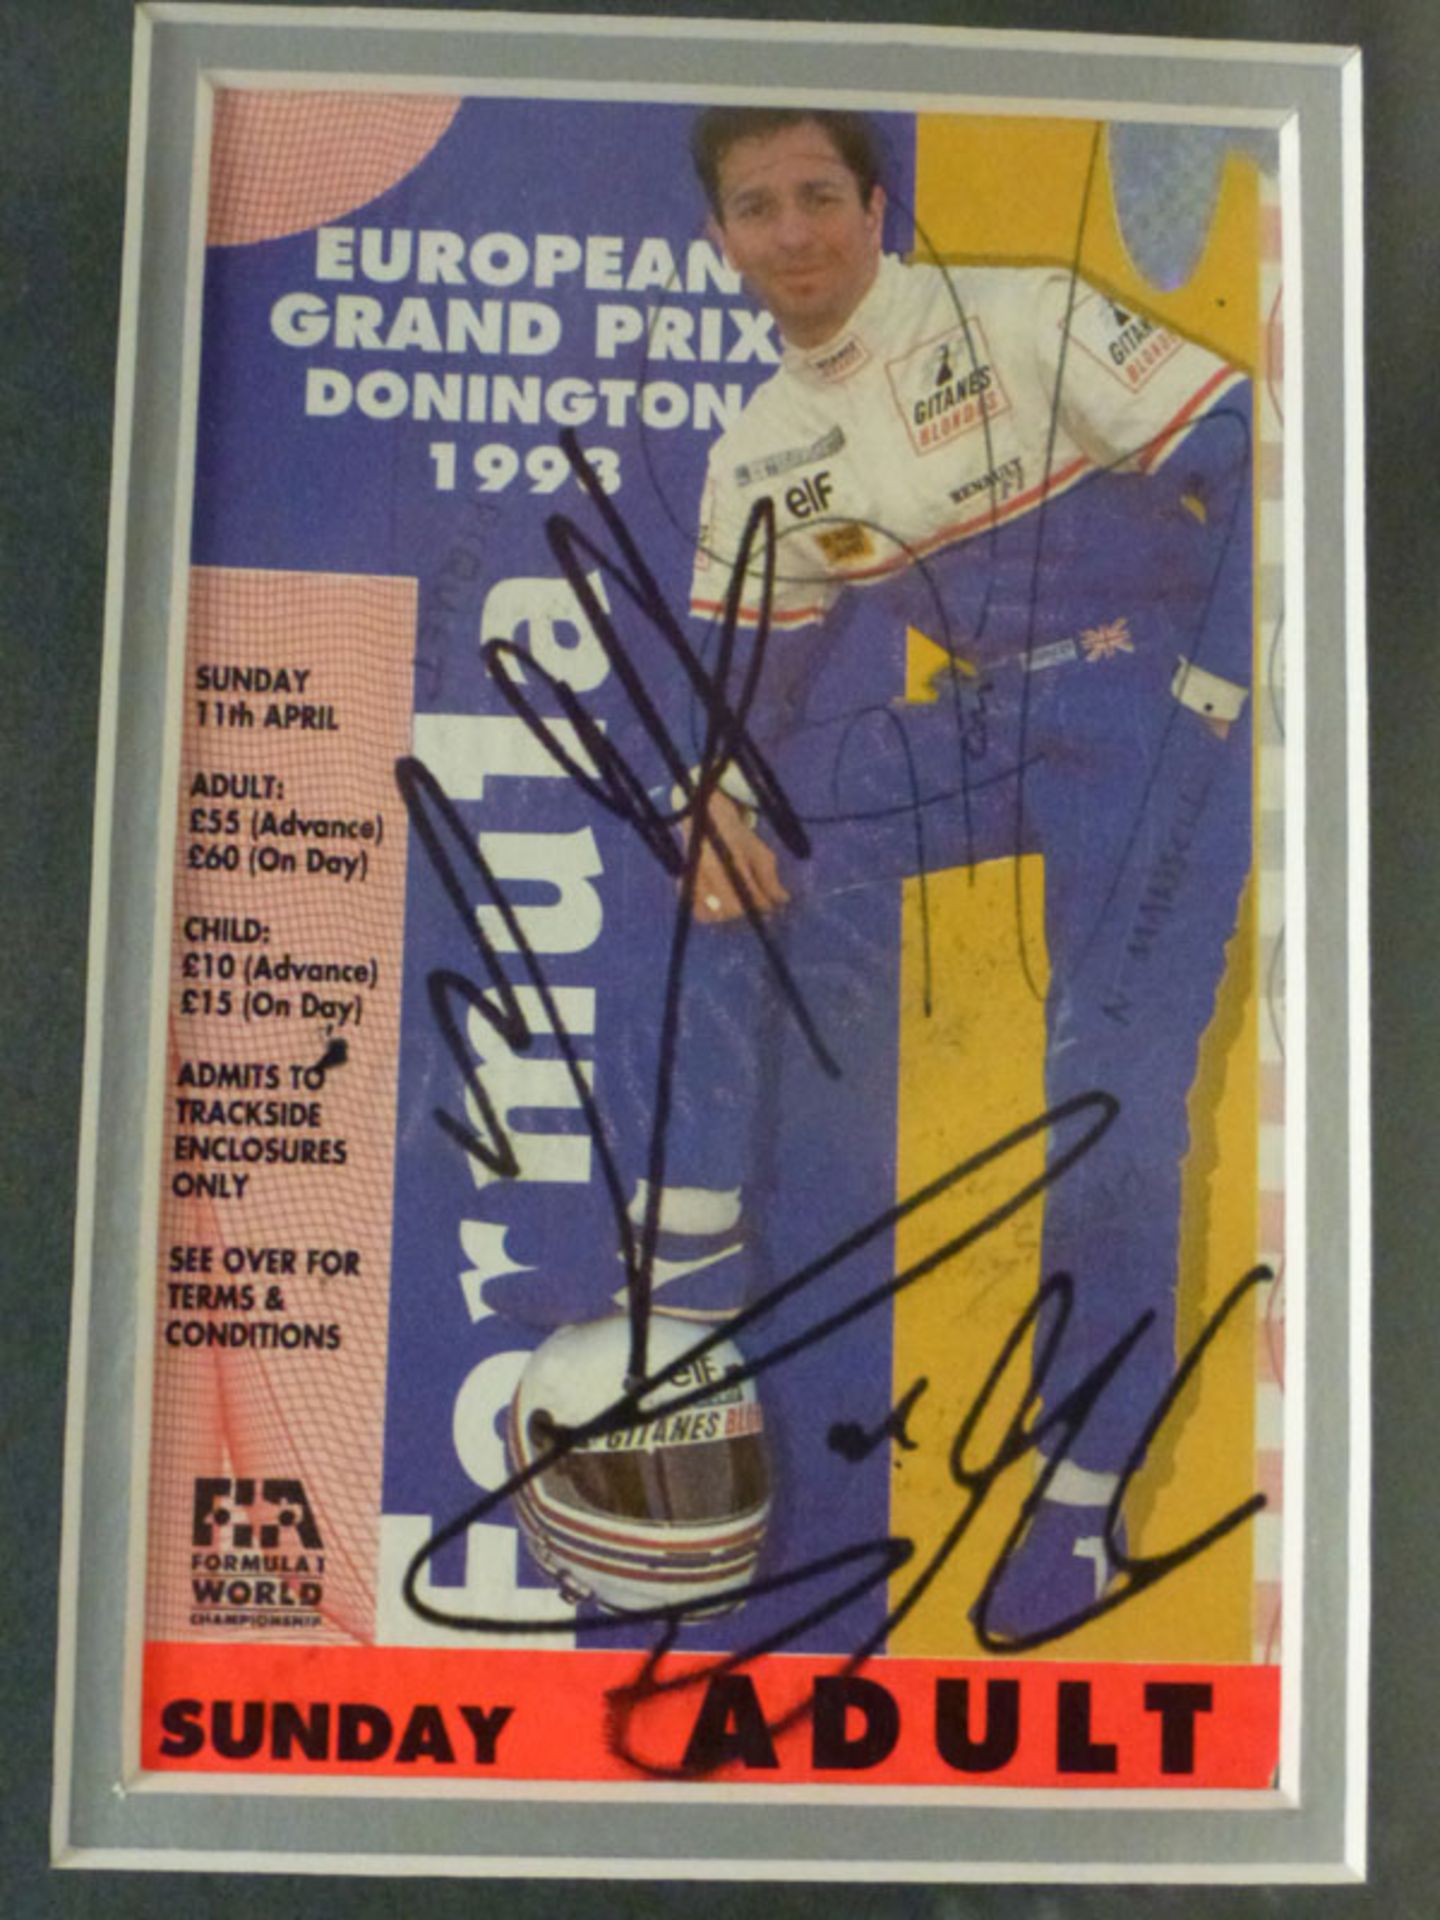 Senna, Prost, Mansell and Piquet Signed Presentation - Image 3 of 3